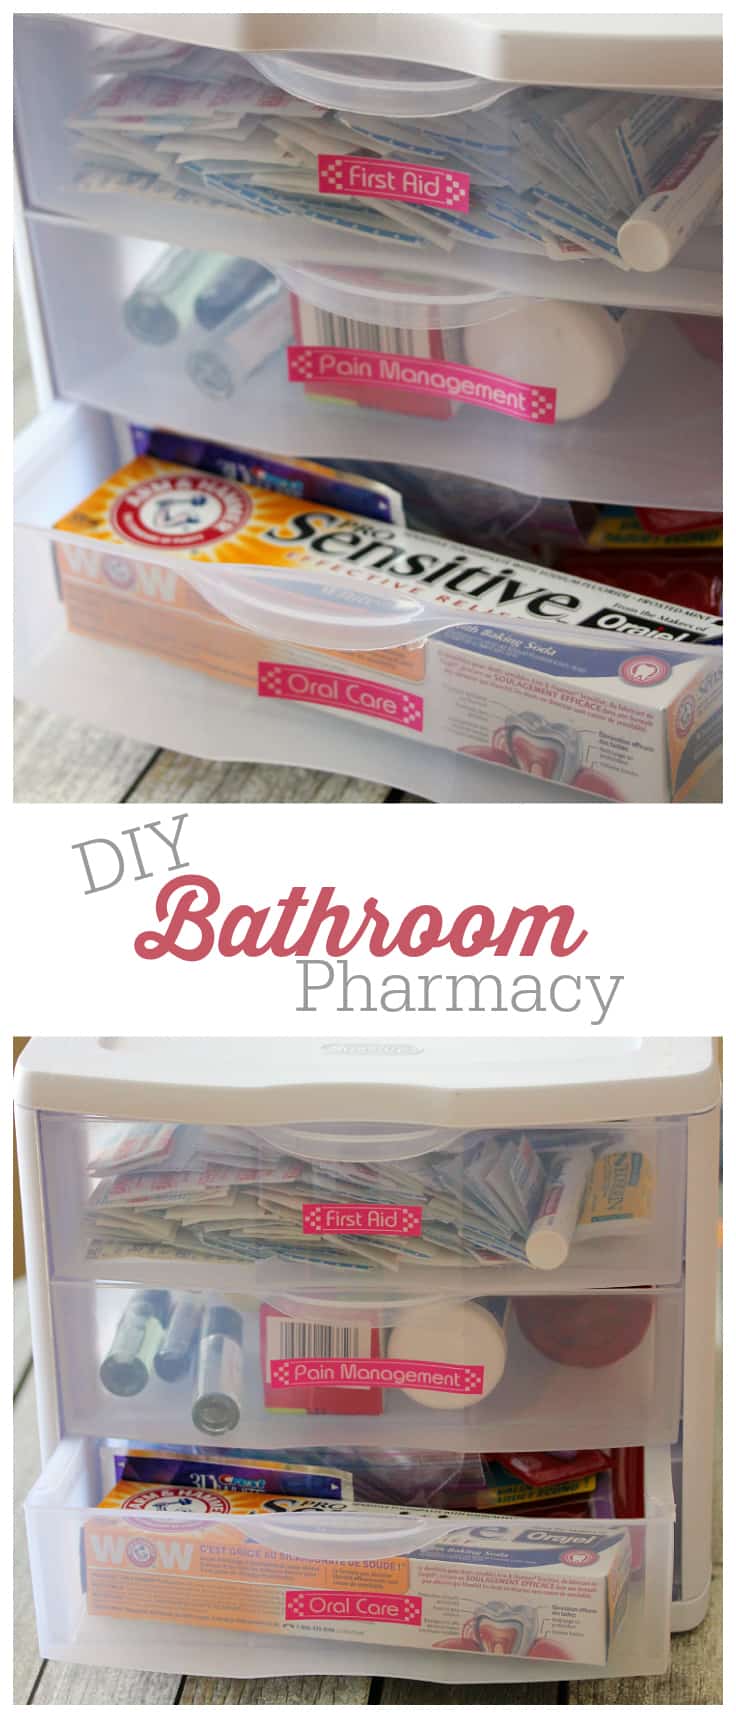 DIY Bathroom Pharmacy - This simple DIY is an affordable way to help you save your limited bathroom space and stay organized.